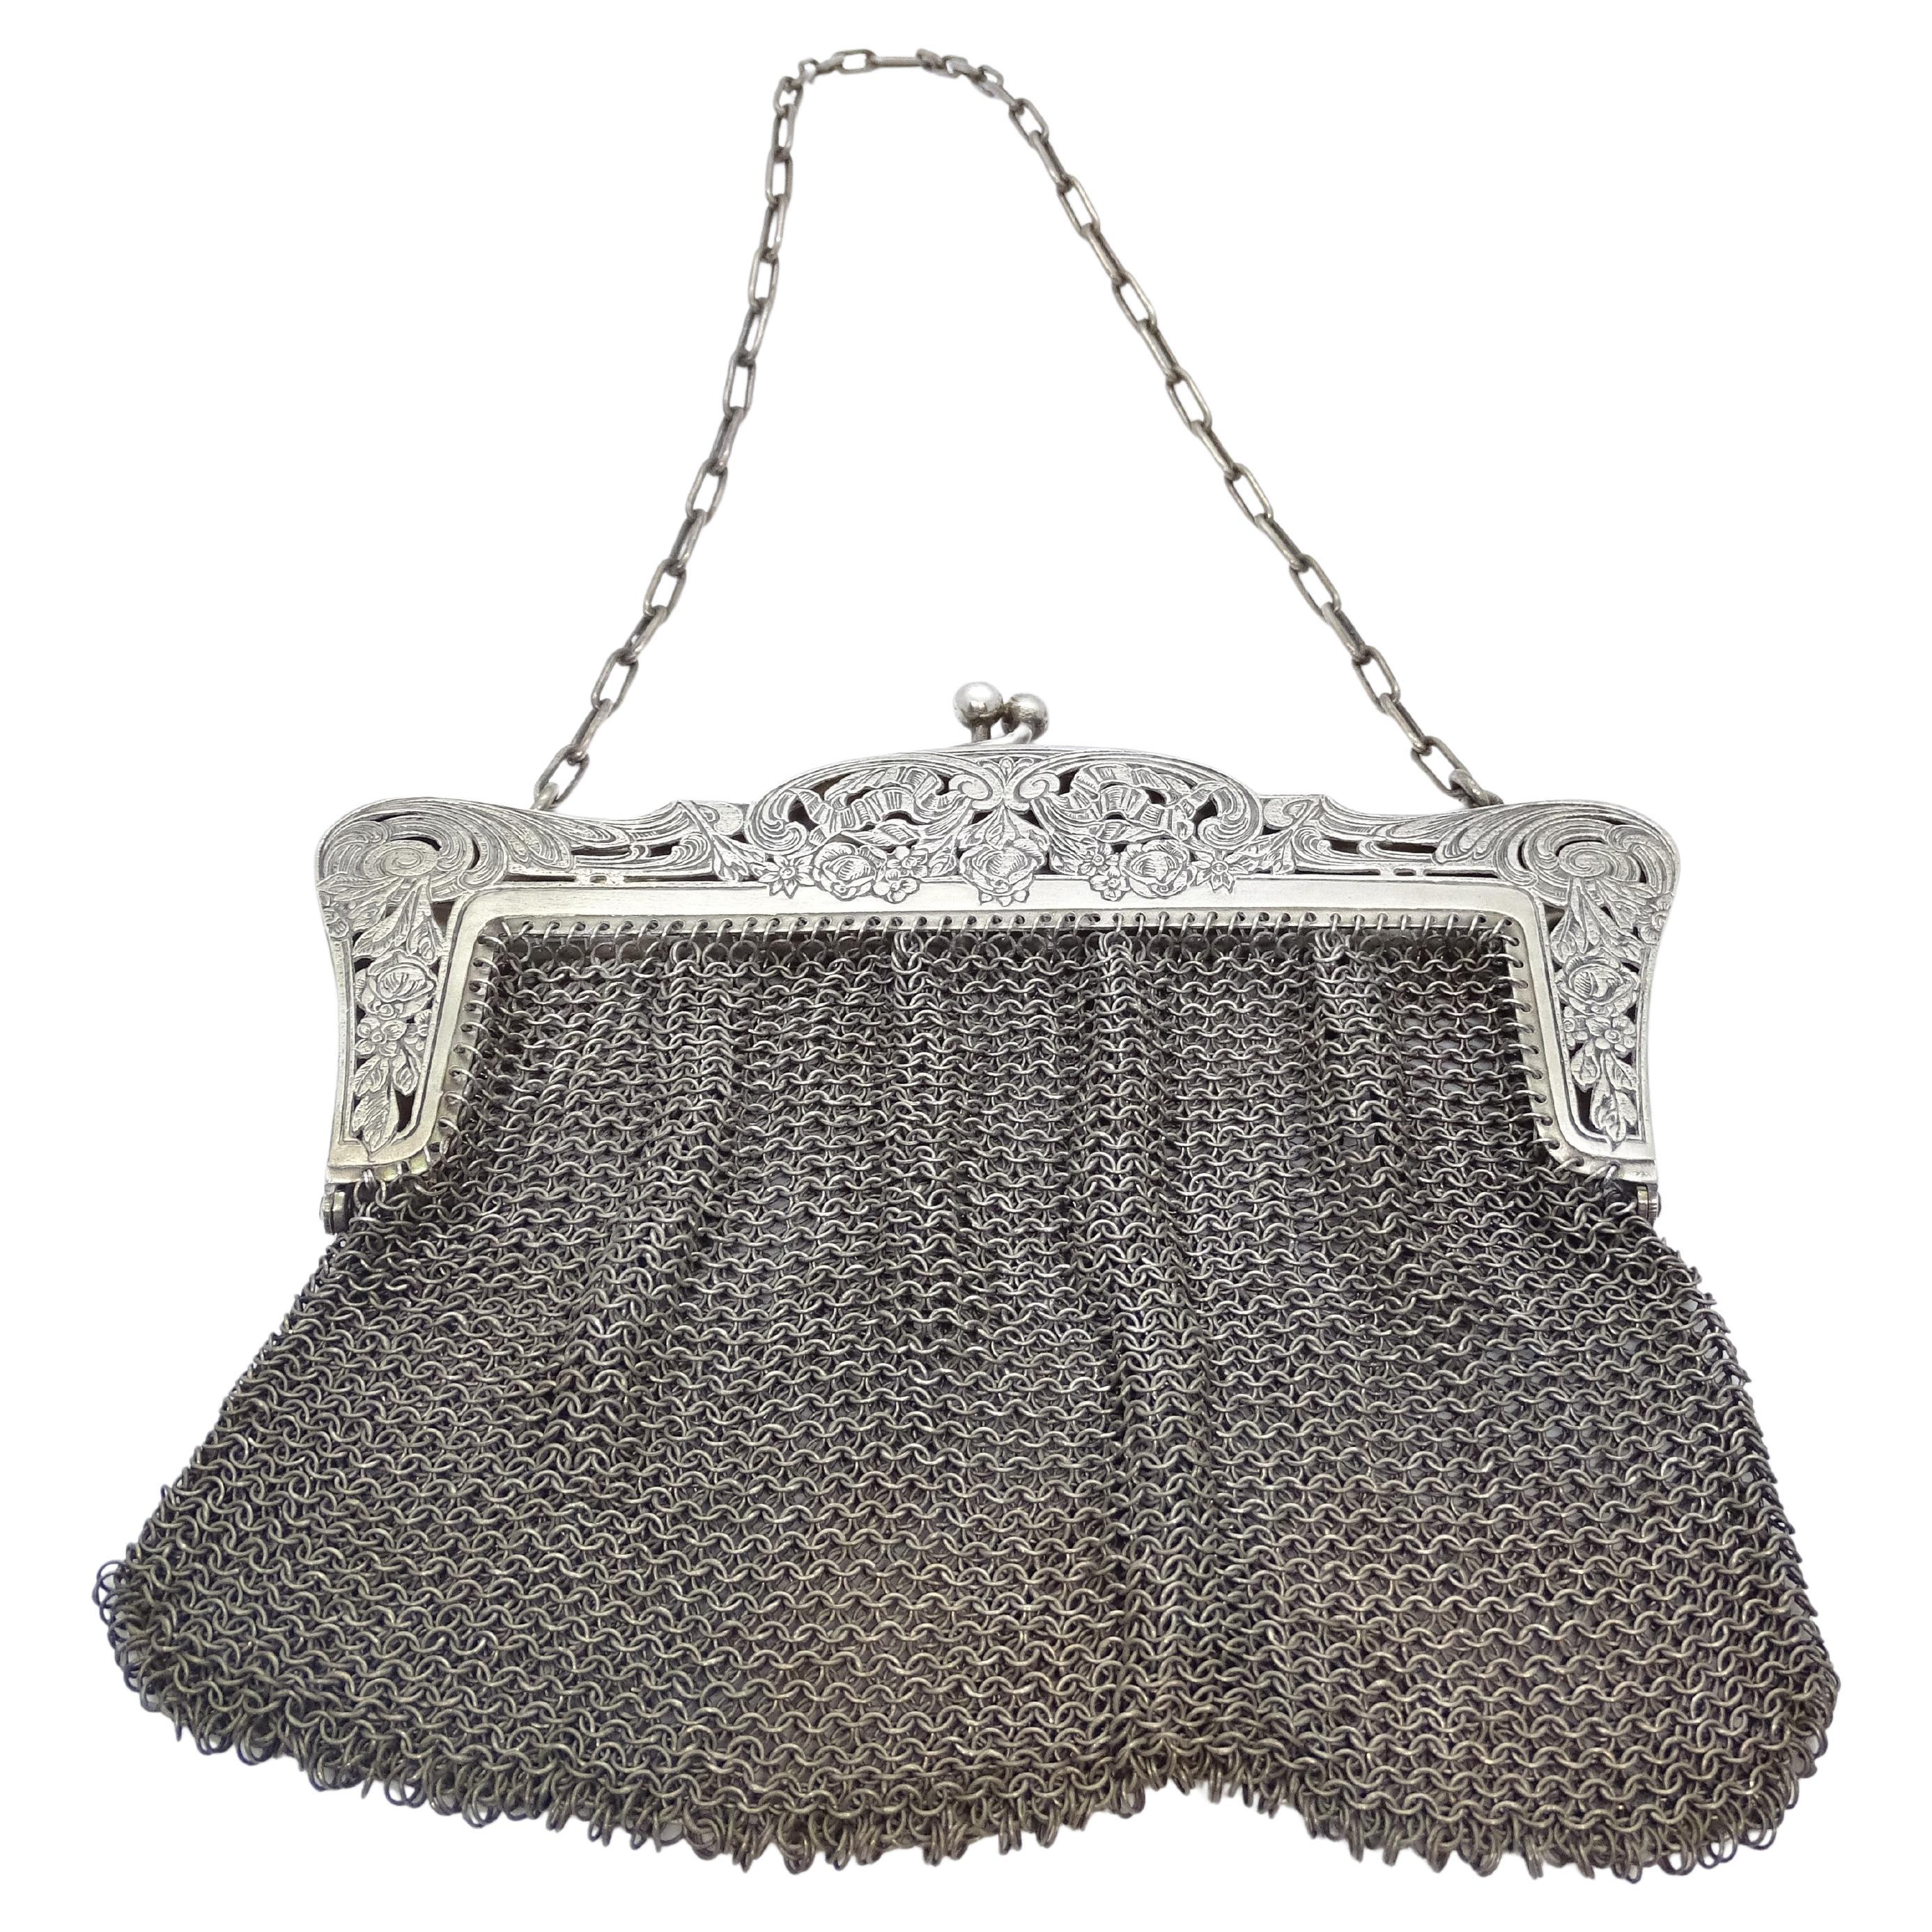 Late 19th Century Evening Bags and Minaudières